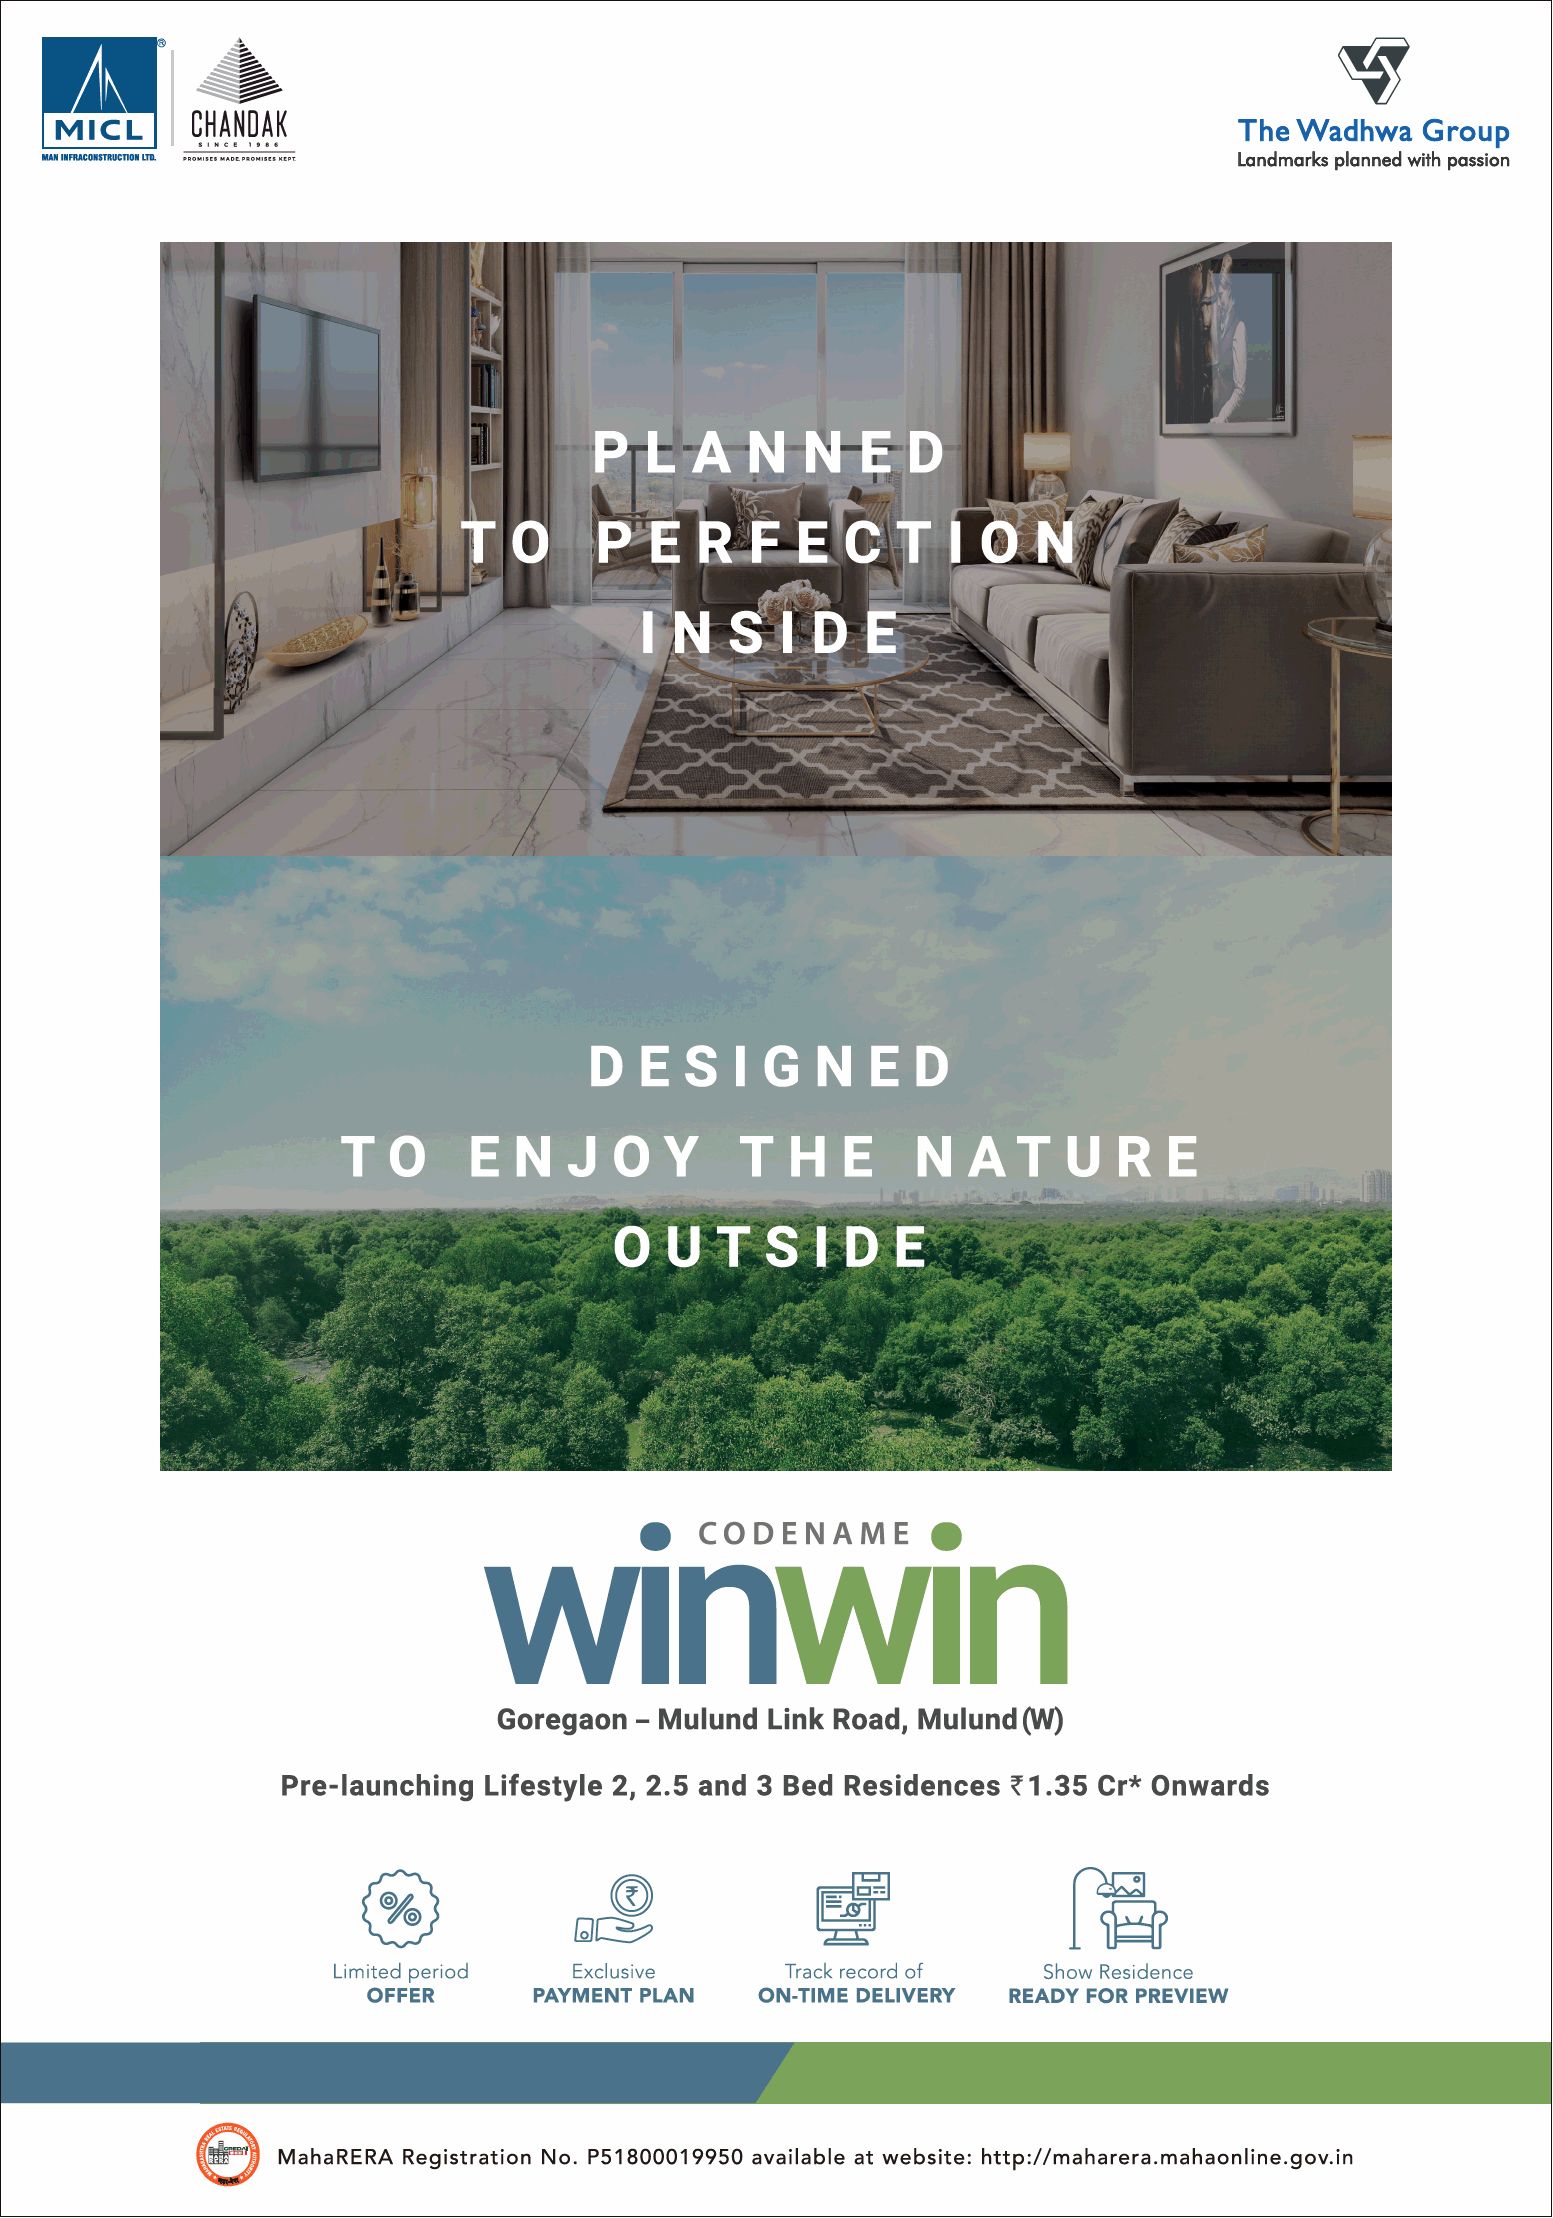 Pre-launching lifestyle 2, 2.5 and 3 bed residences Rs 1.35 Cr at Wadhwa Codename Win Win, Mumbai Update